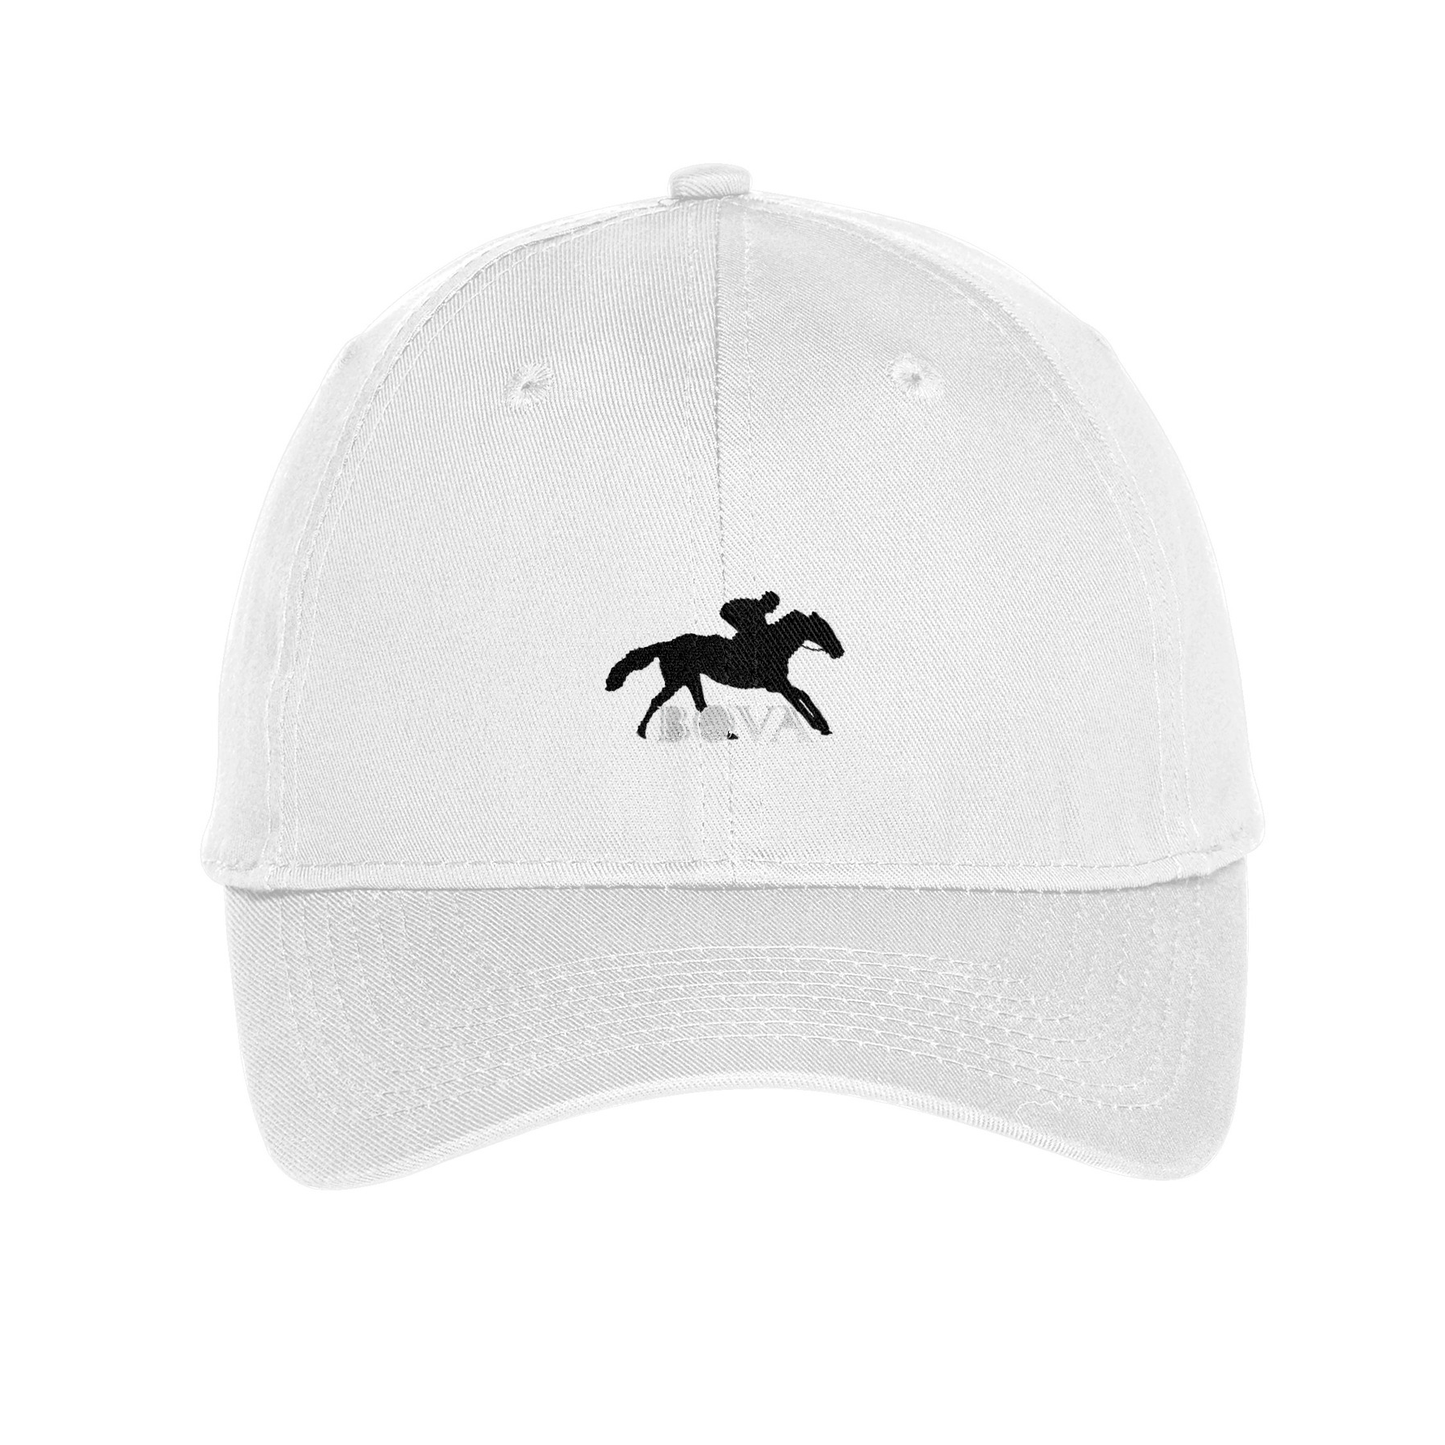 GT Bova Embroidered Twill Cap